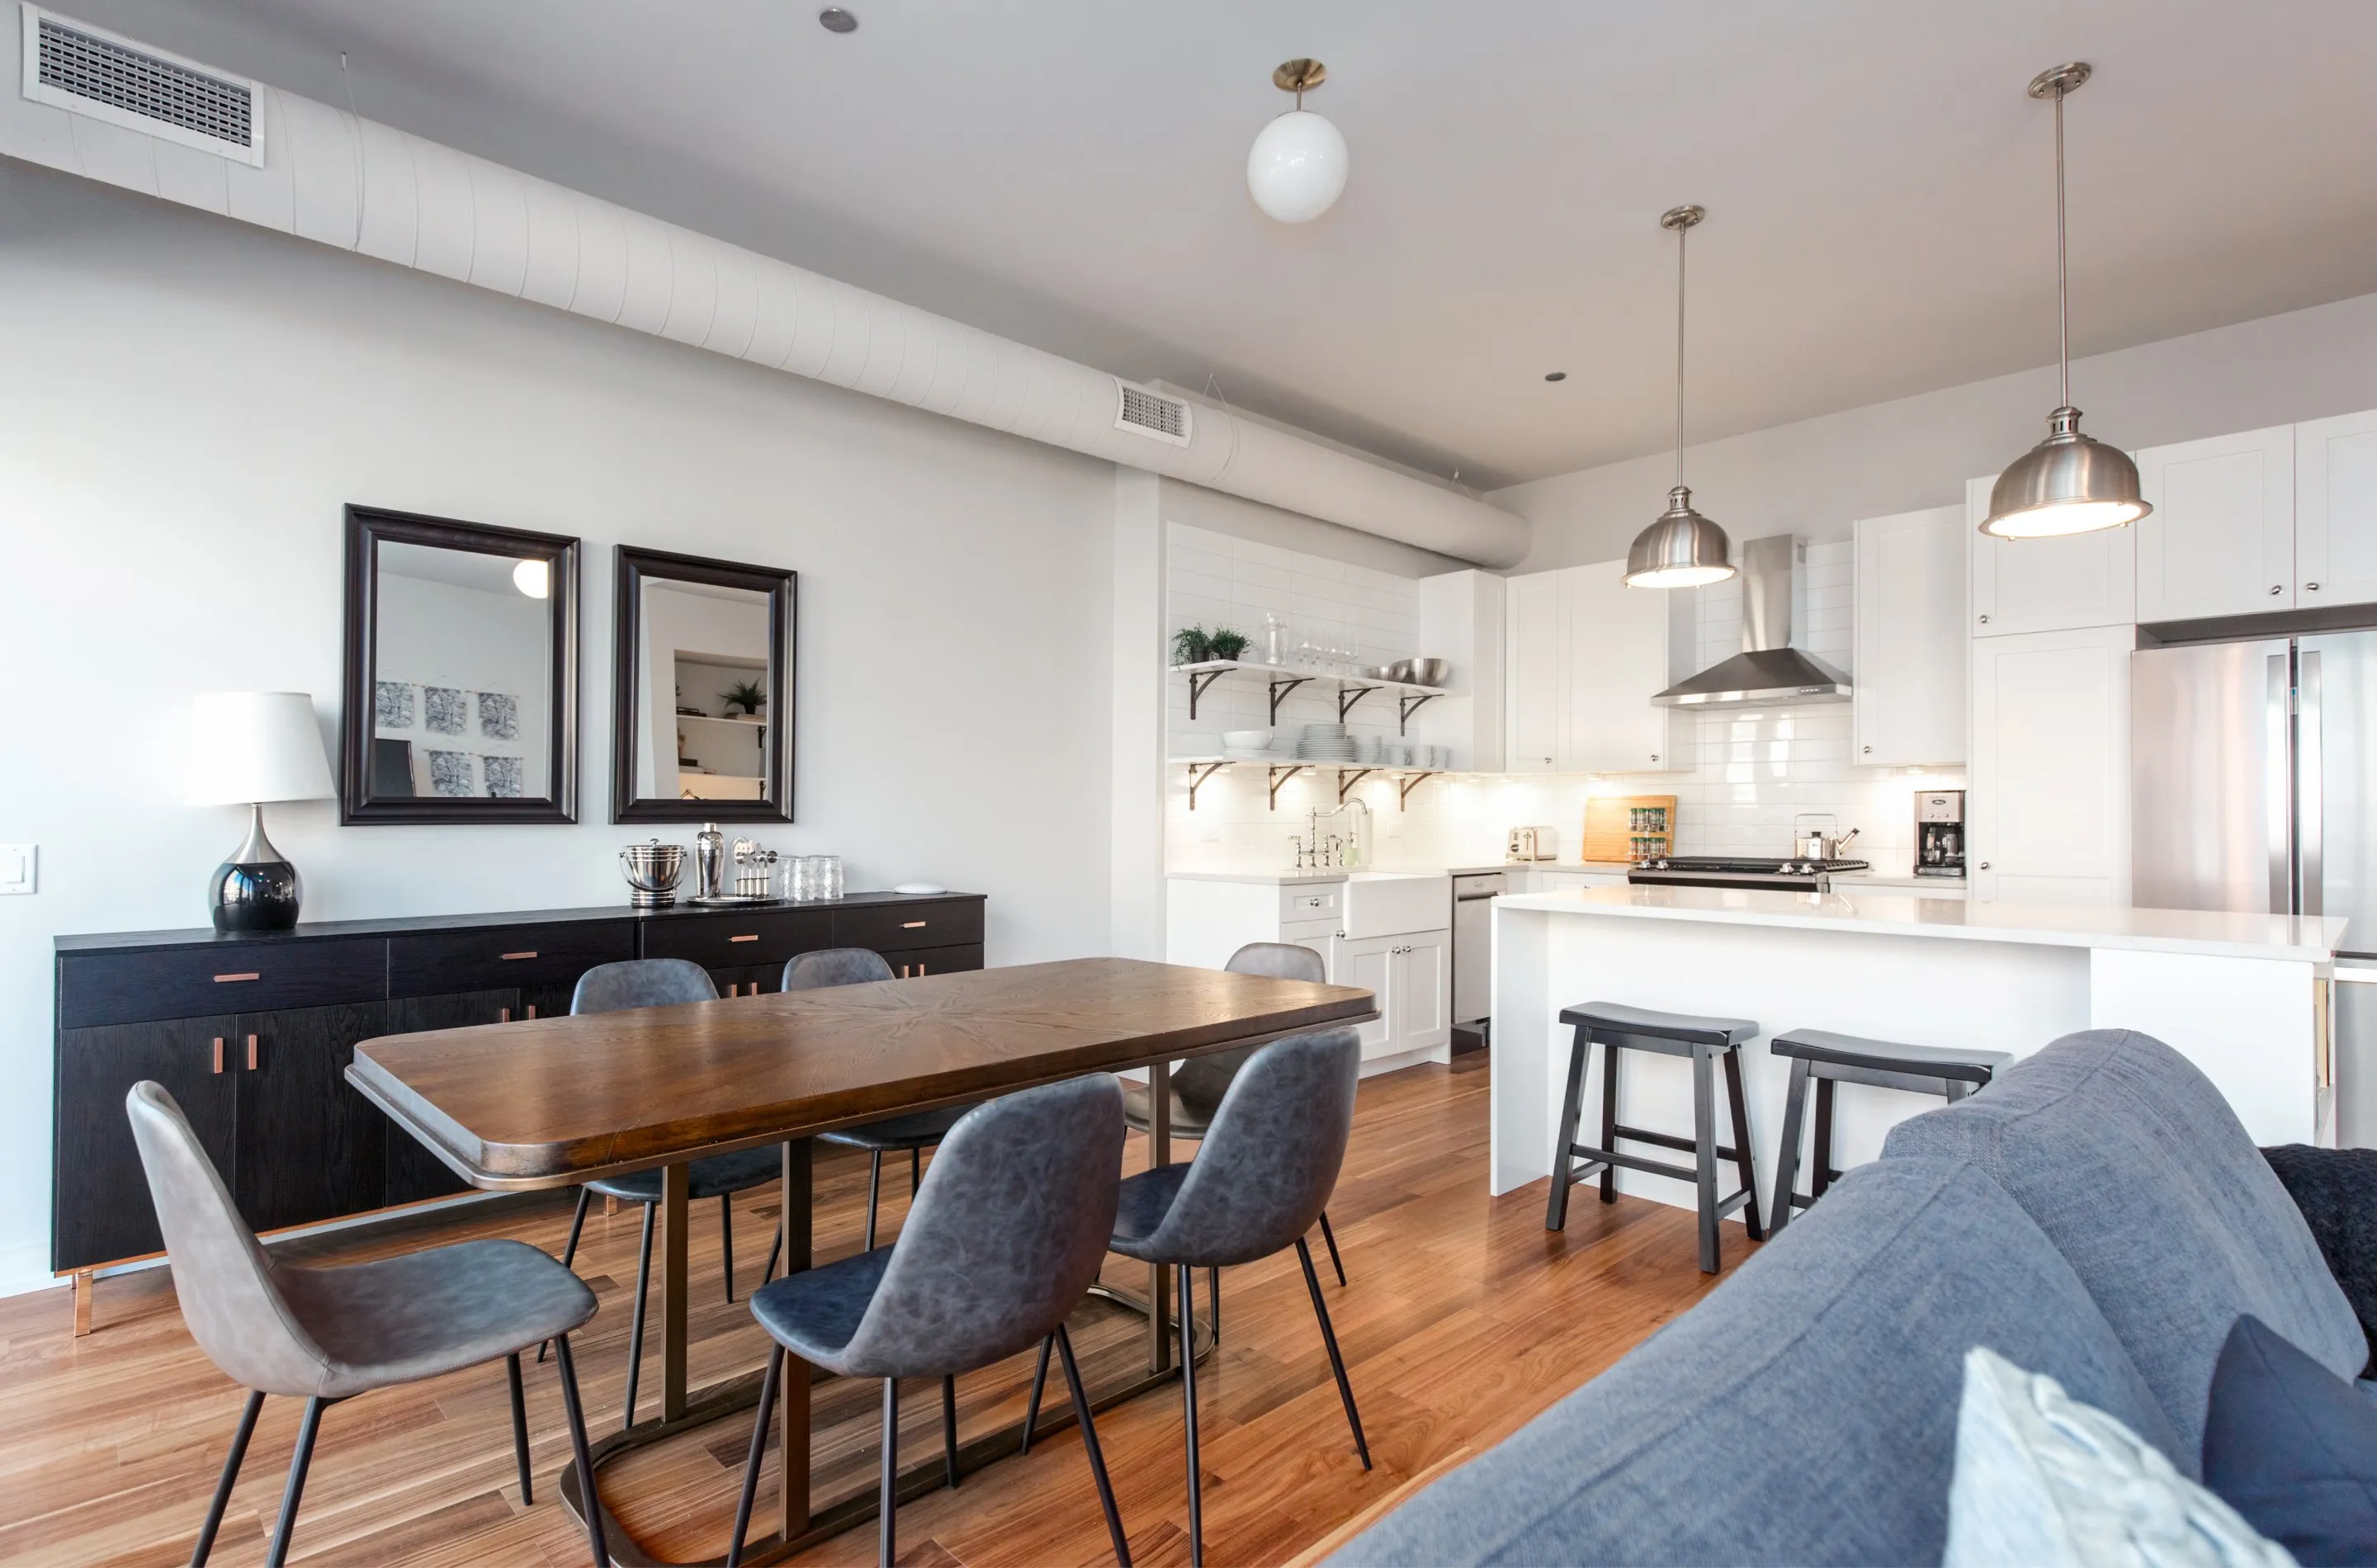 4 bedroom apartments in andersonville